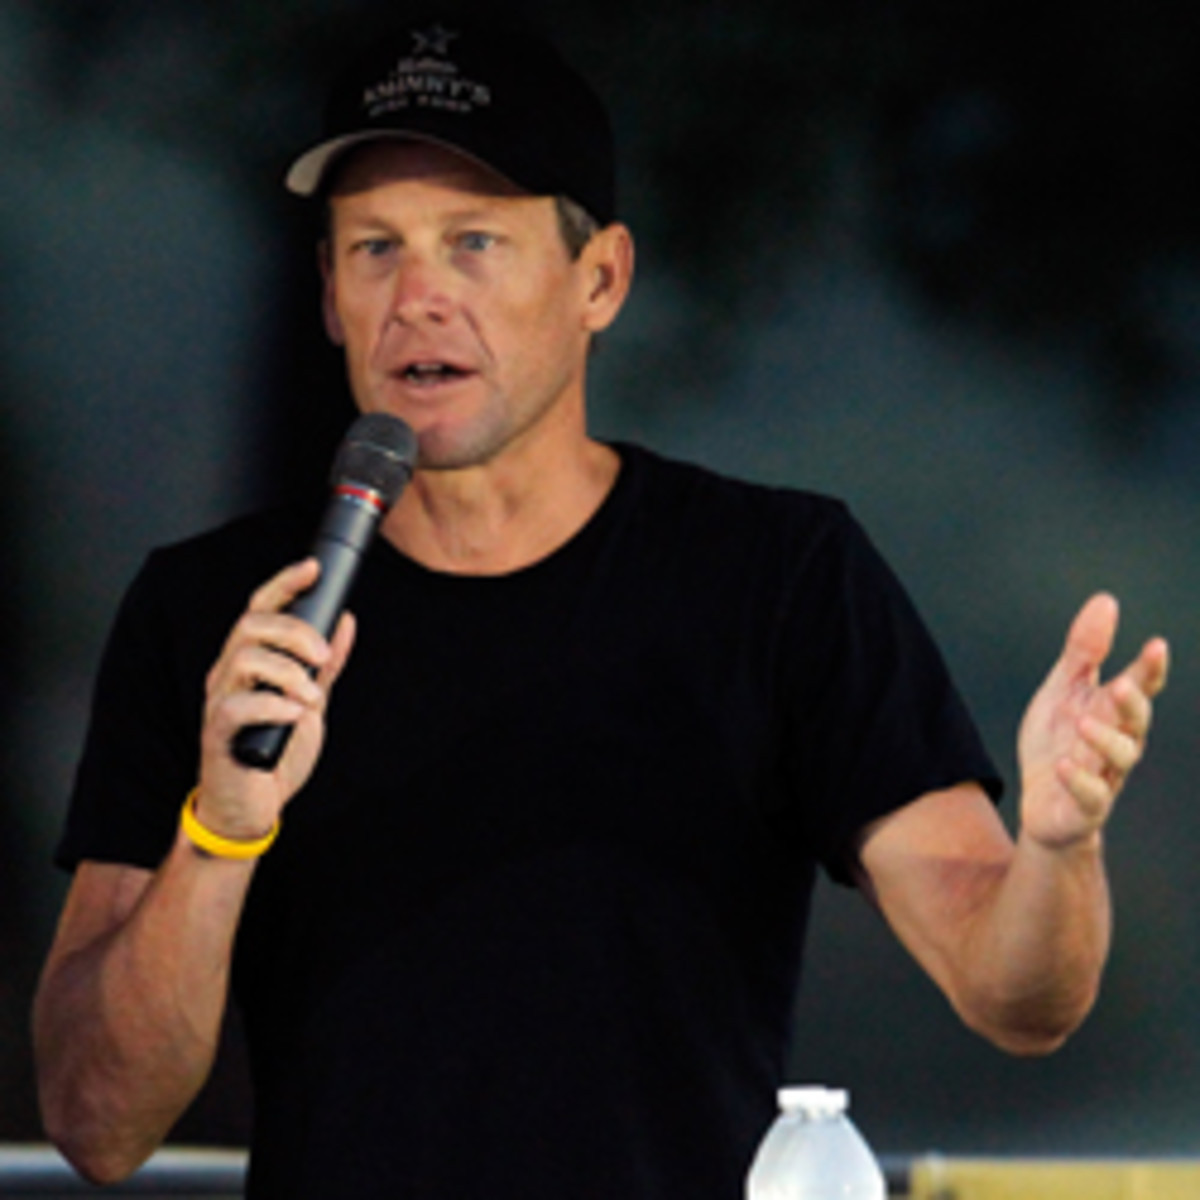 Lance Armstrong was stripped of his seven Tour de France titles in October. (Tom Pennington/Getty Images)